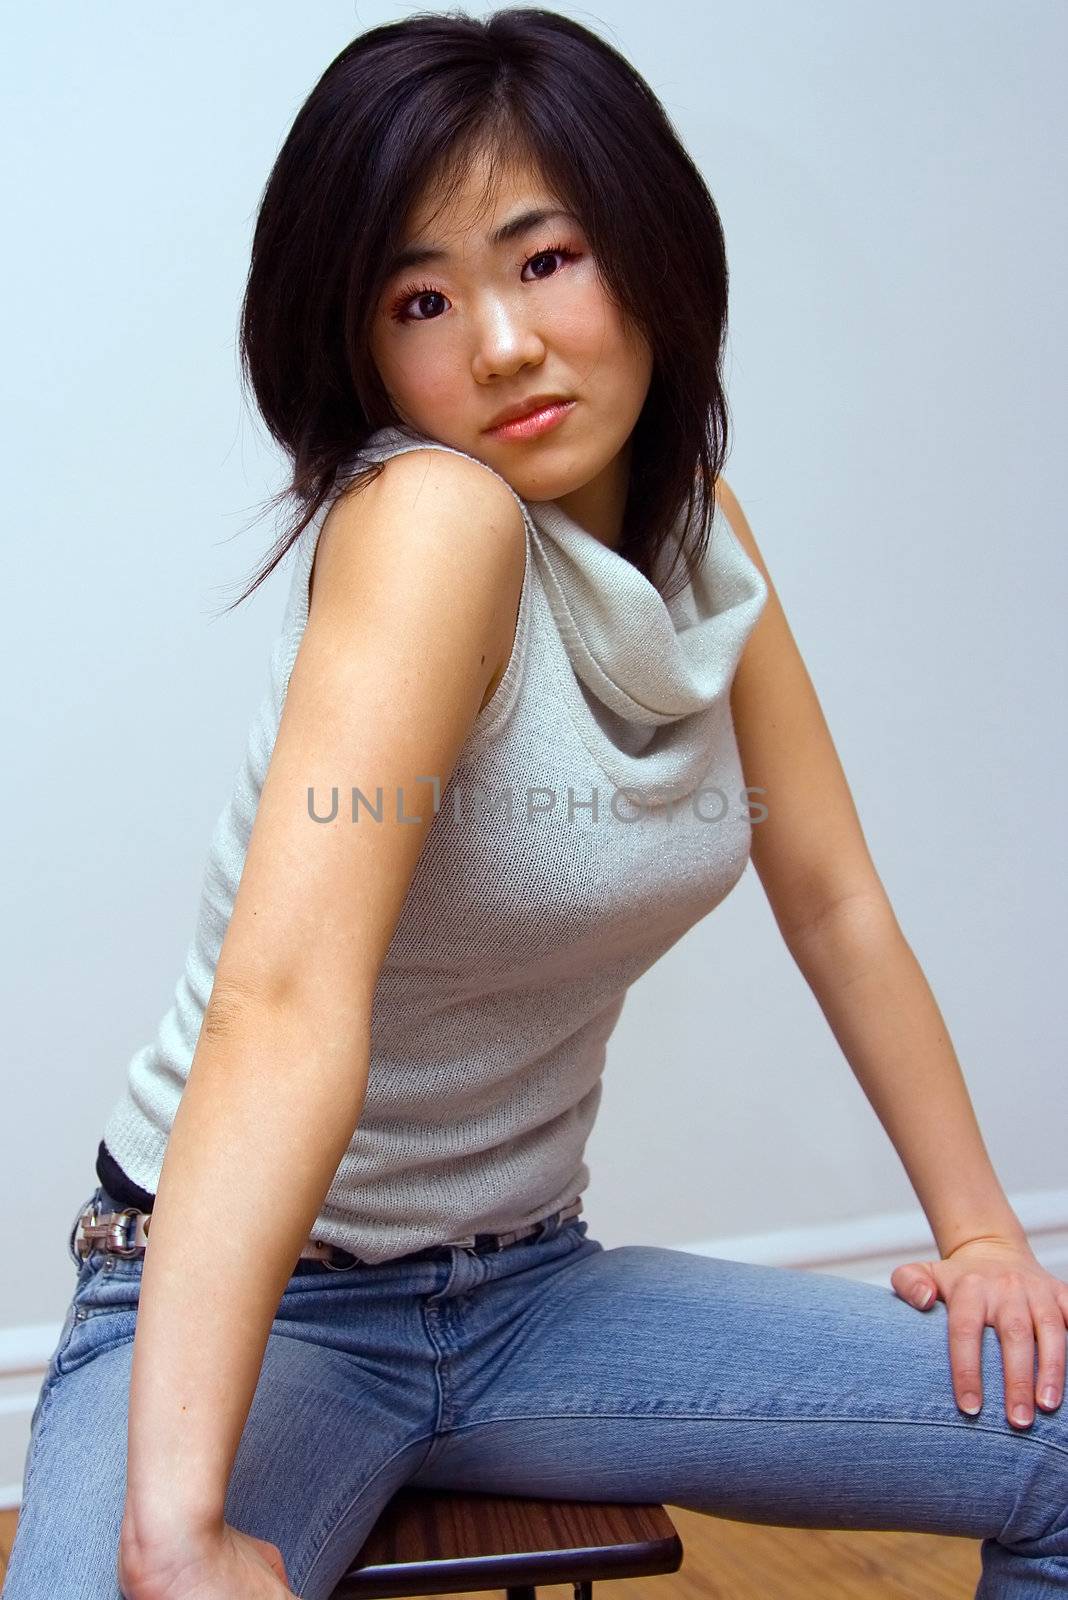 Beautiful Oriental woman with an attitude in a white collared shirt